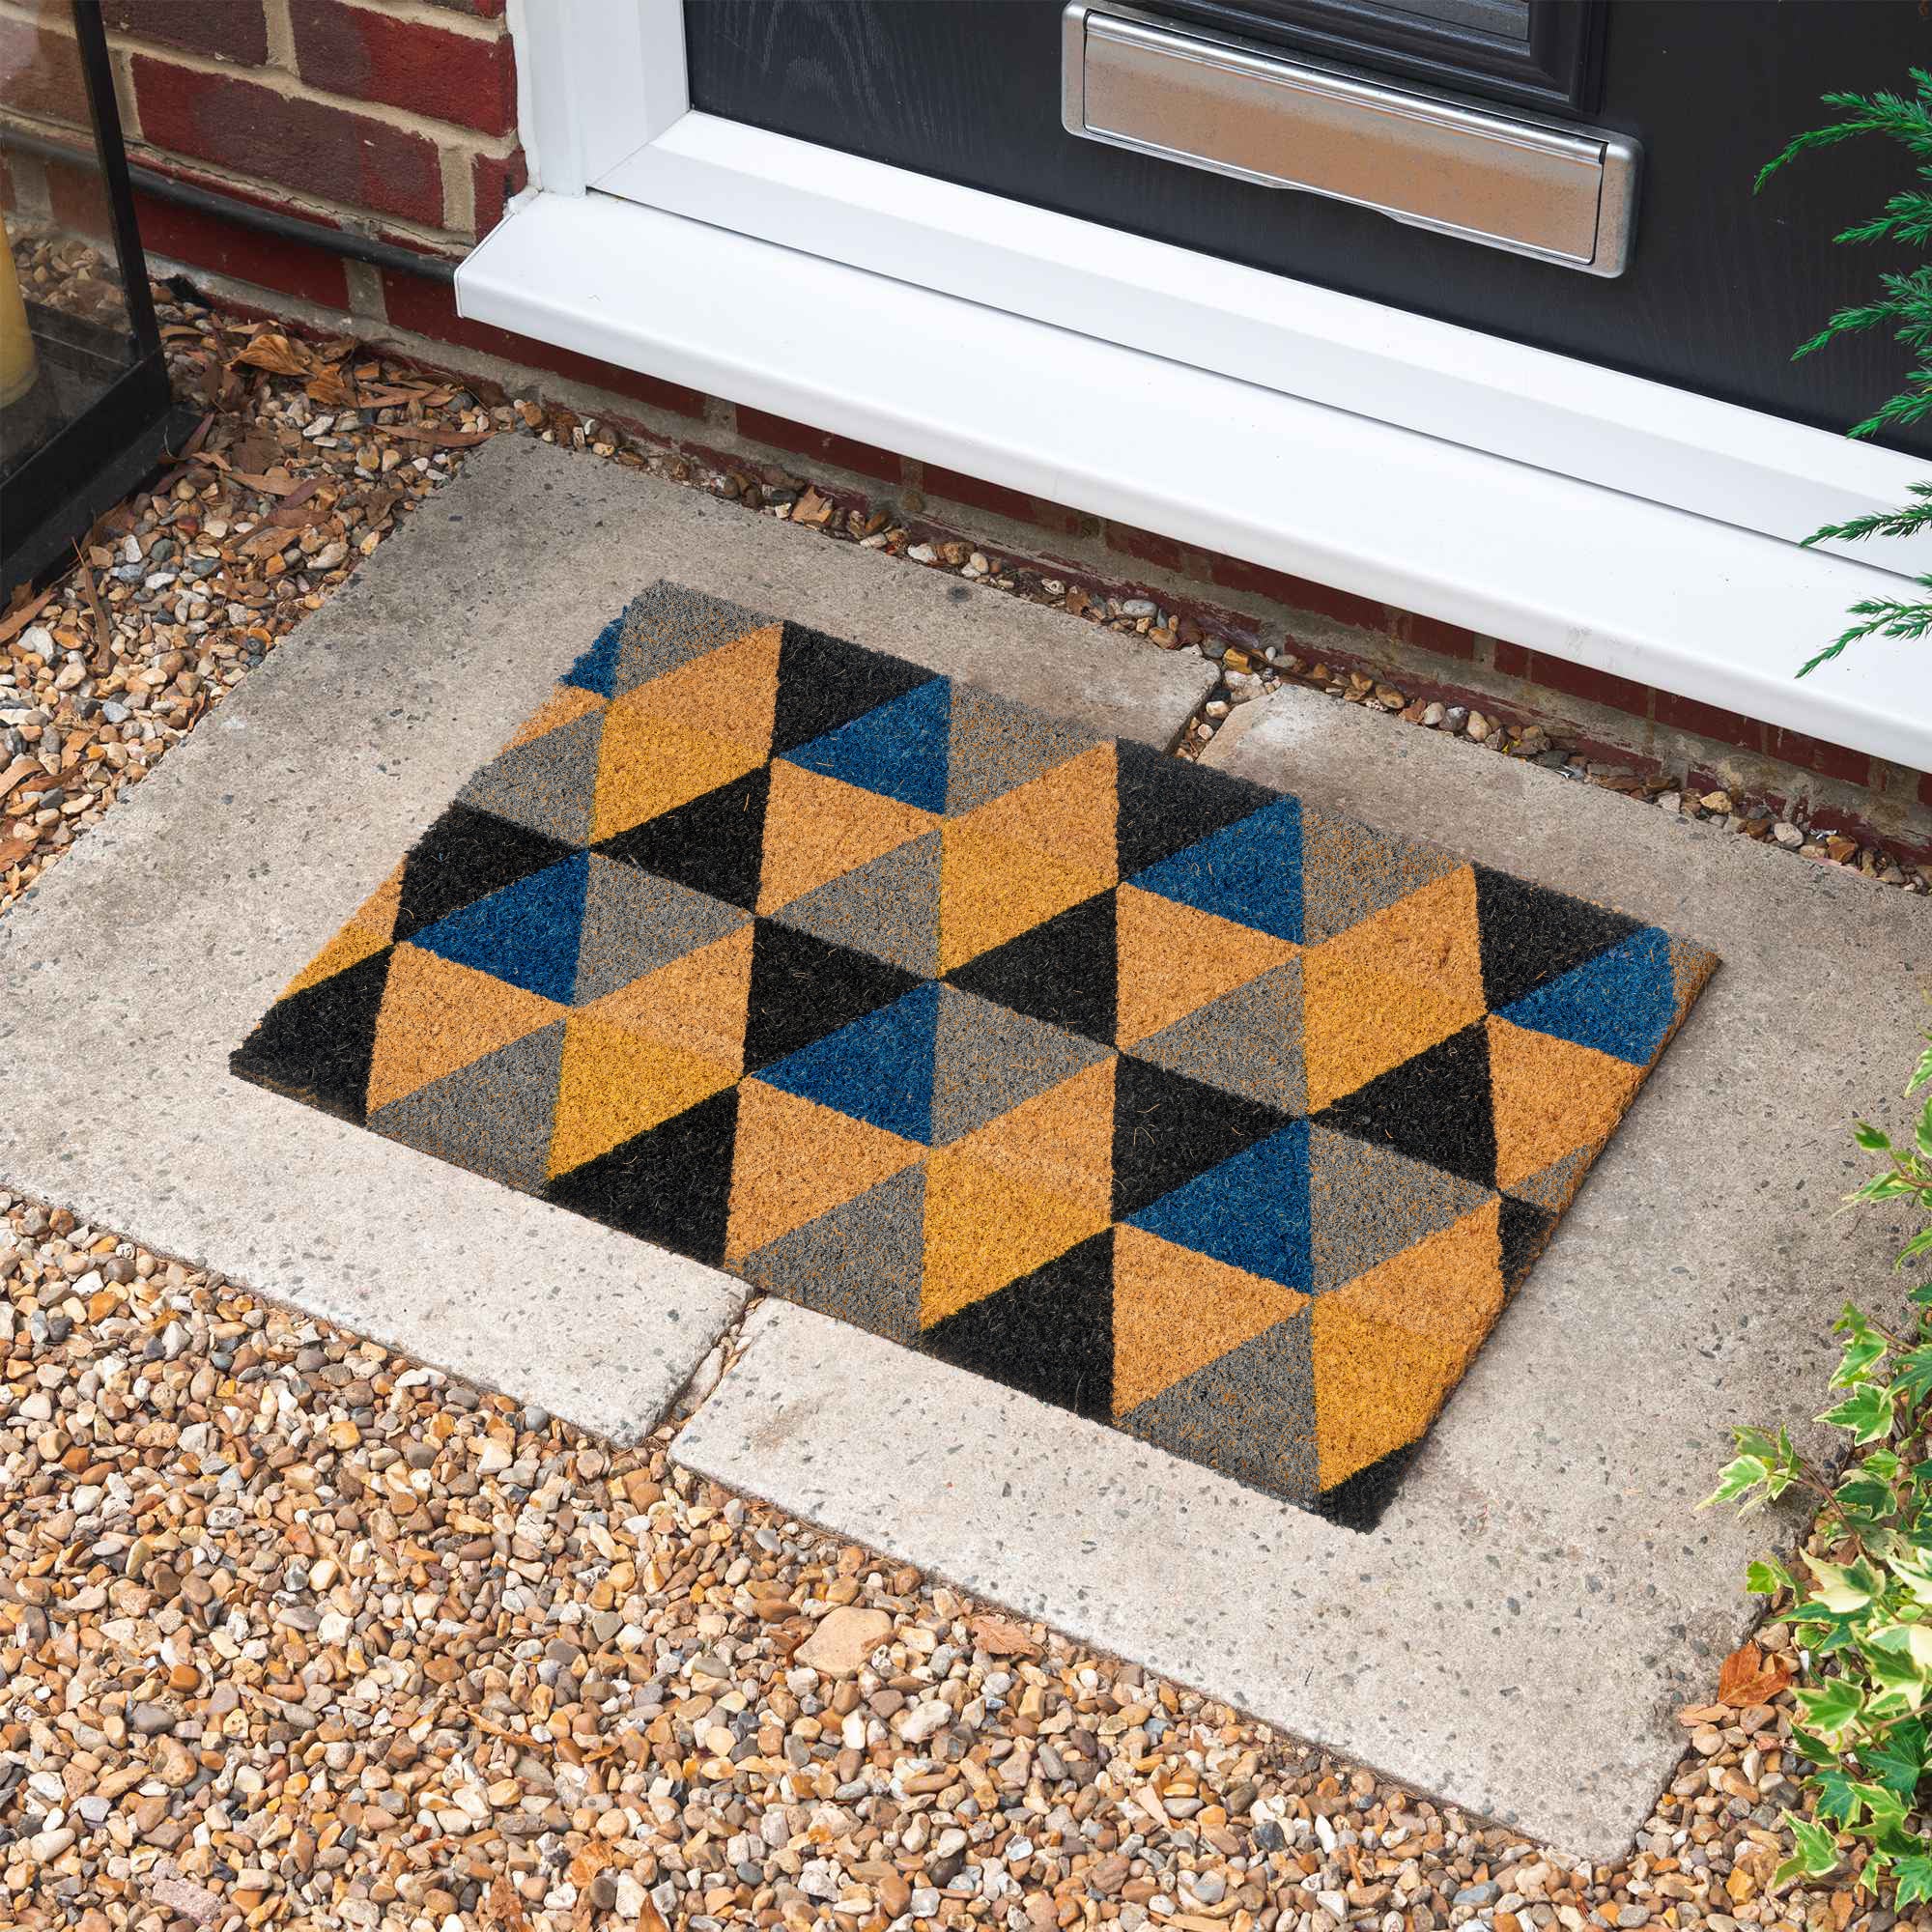 What Is The Best Outdoor Mat Material? 4 Keys To Pick The Best